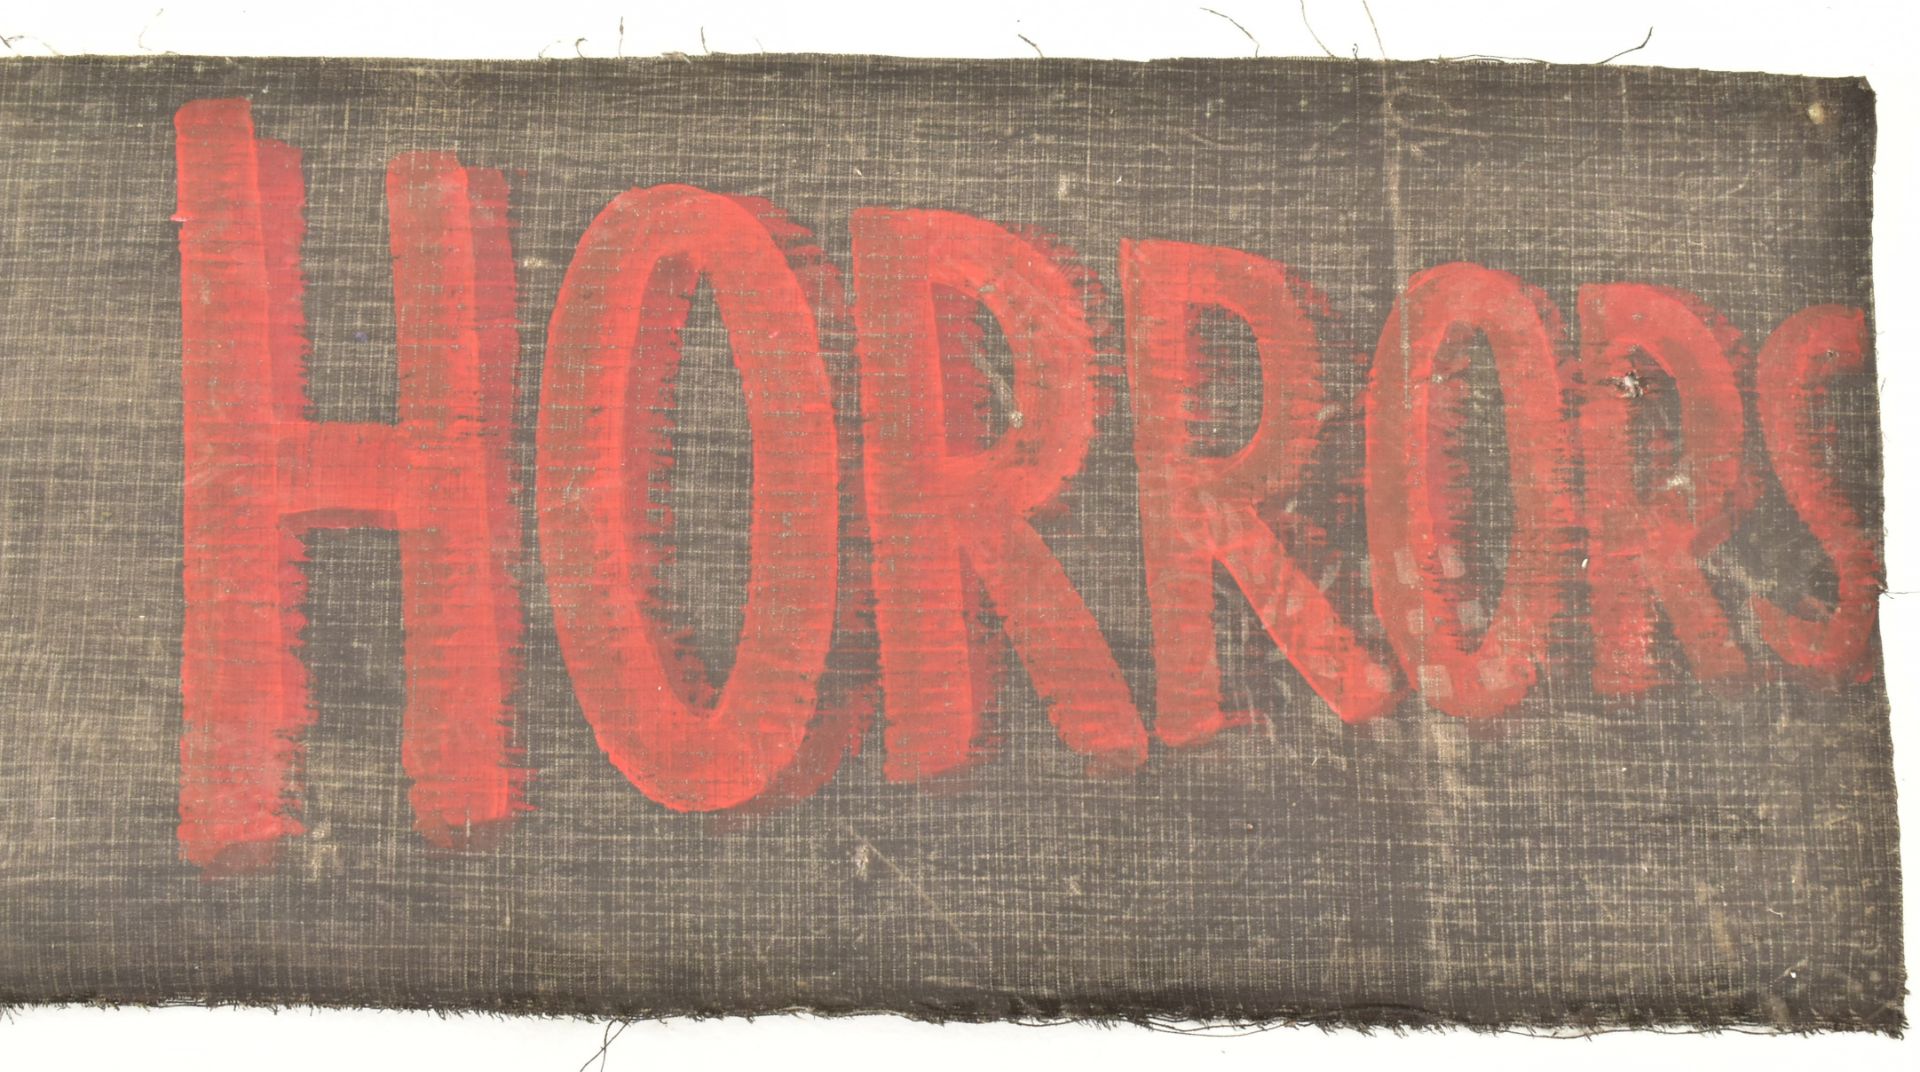 HOUSE OF HORRORS - FAIRGROUND PAINTED CANVAS SIGN - Image 4 of 5